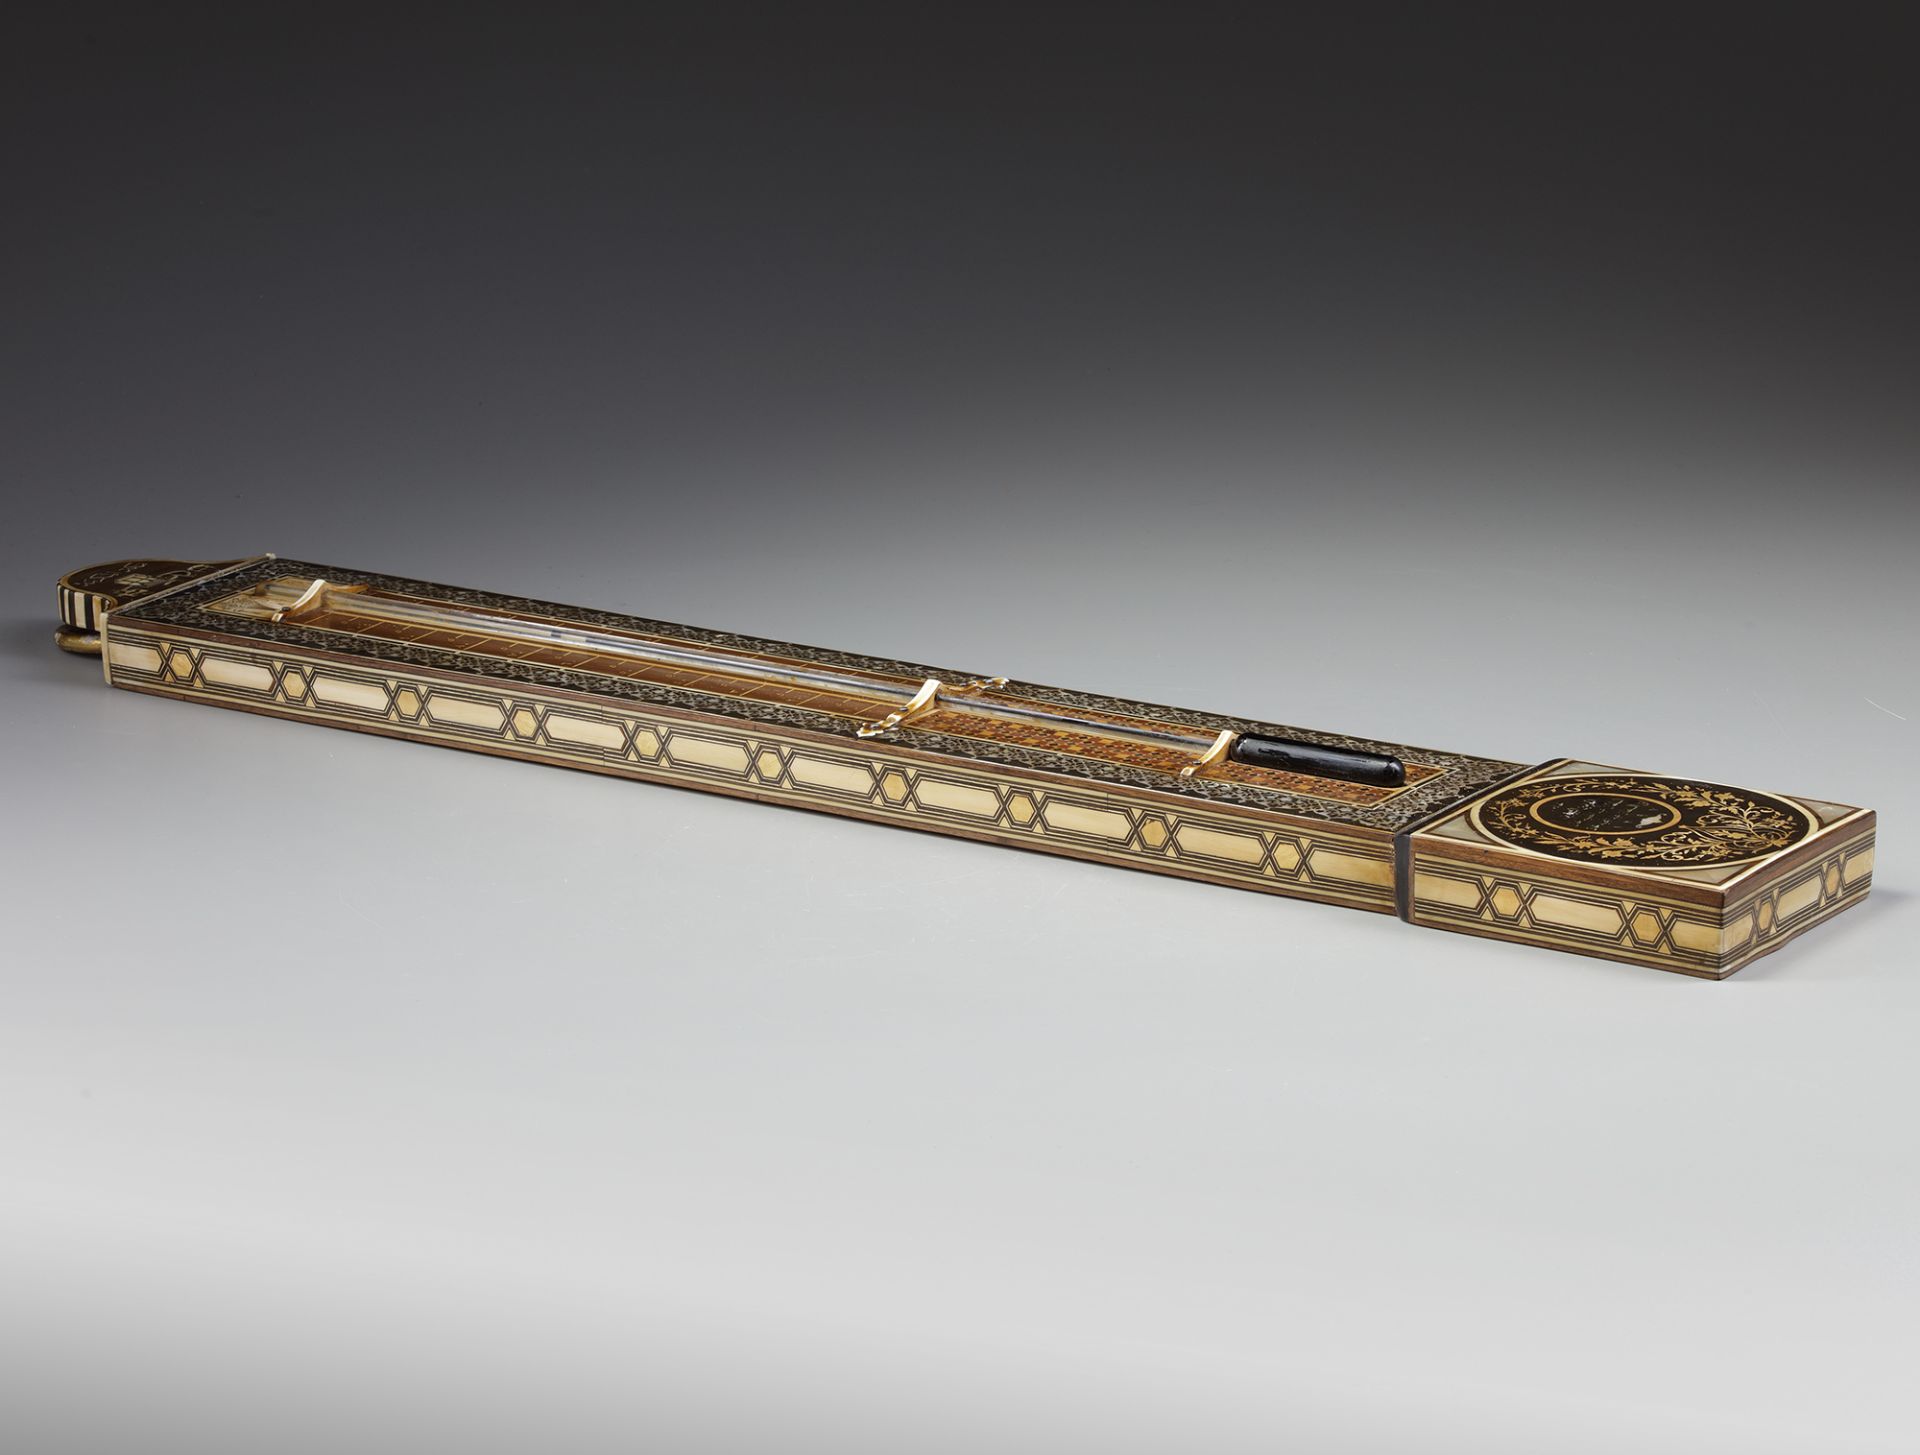 AN OTTOMAN WOODEN MOTHER-OF-PEARL AND IVORY INLAID BAROMETER,1297 AH/1879 - 1880 AD - Image 9 of 12